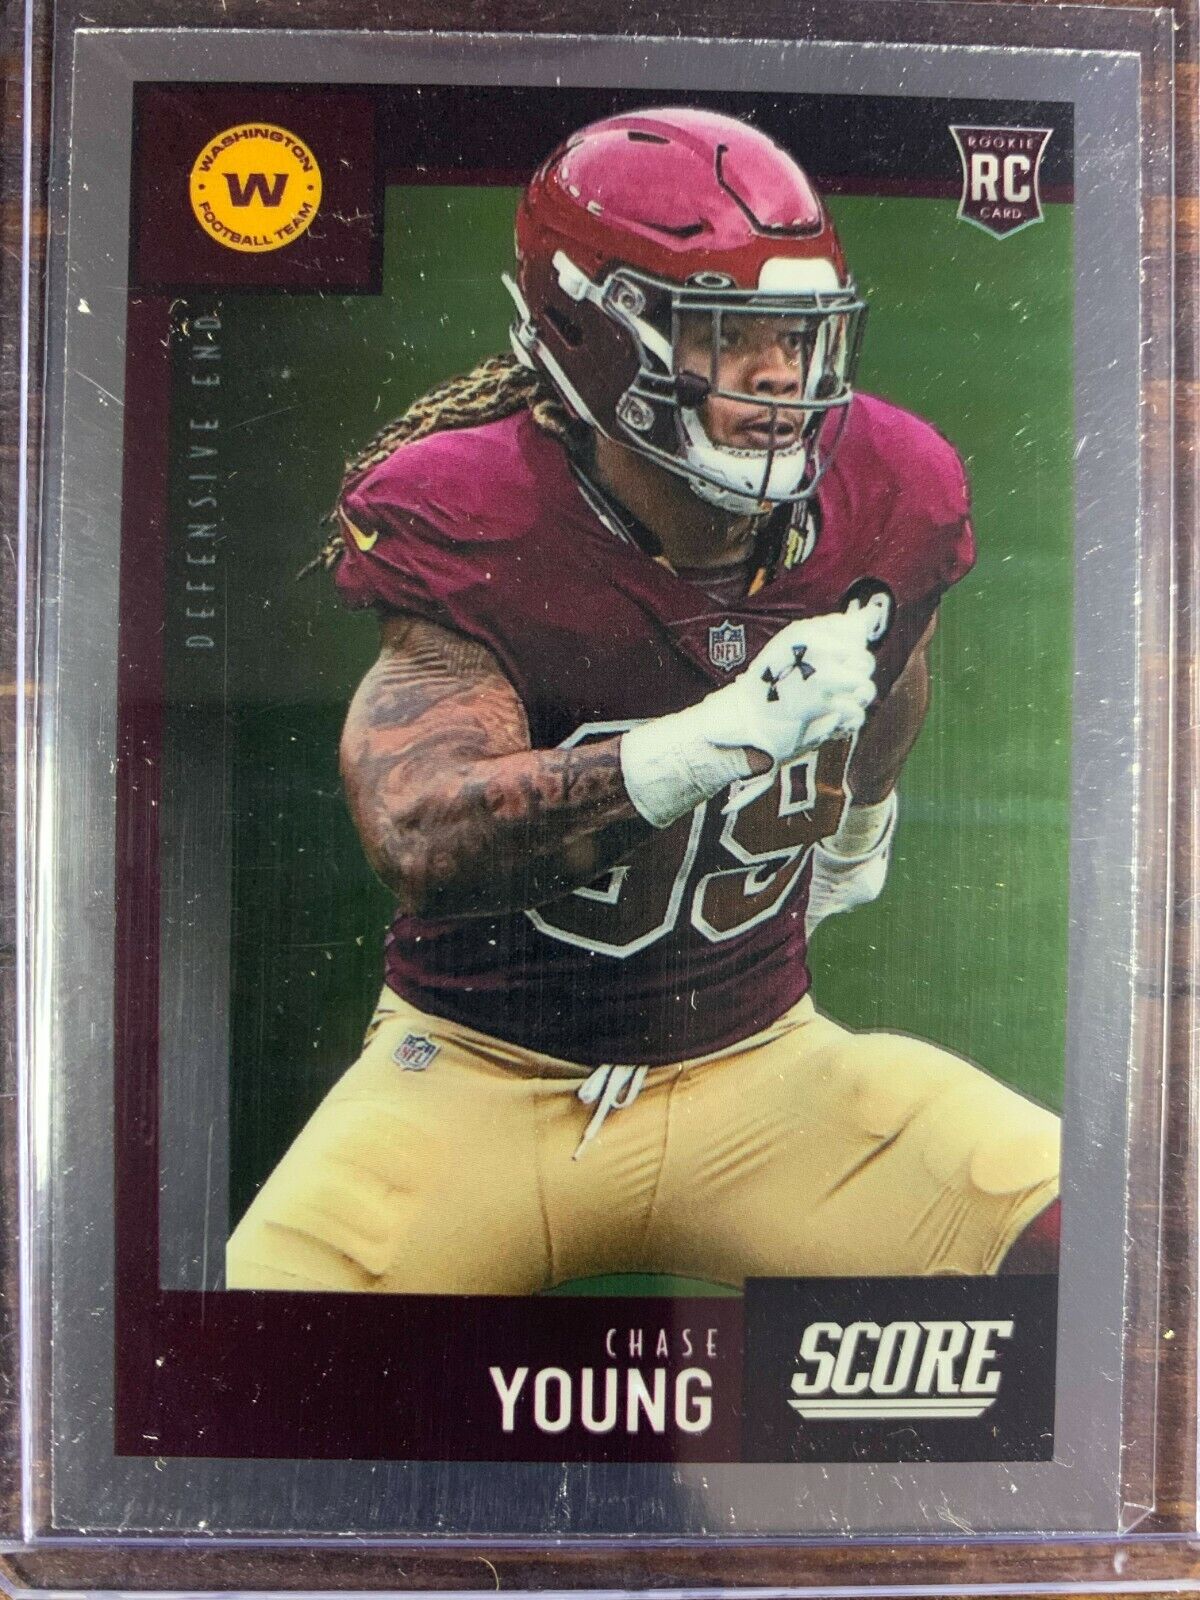 Washington Football Team Chase Young rookie jersey